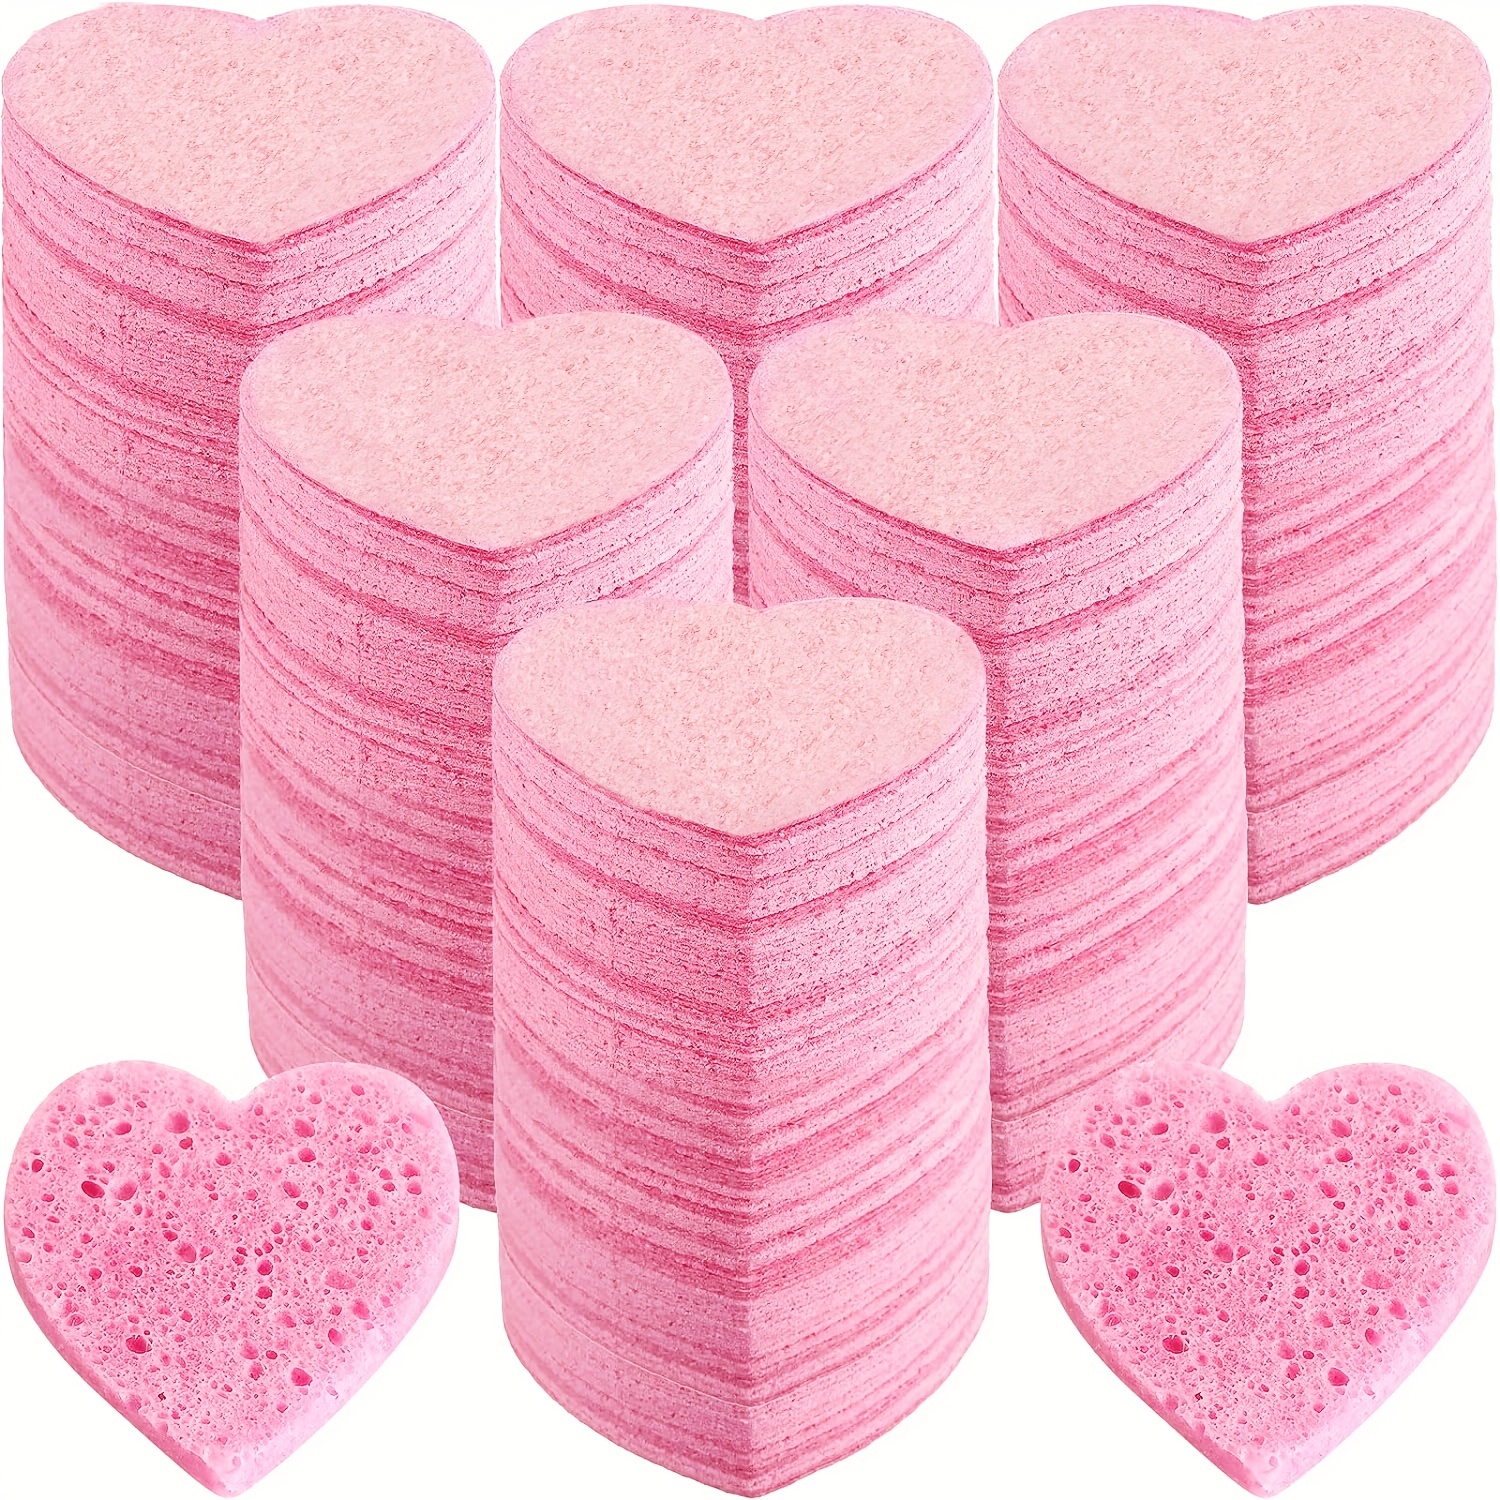 Buy Wholesale China Wholesale Facial Sponges Heart Shape Face Sponge For  Face Cleansing Exfoliating And Makeup Removal For Women & Facial Sponges at  USD 0.26